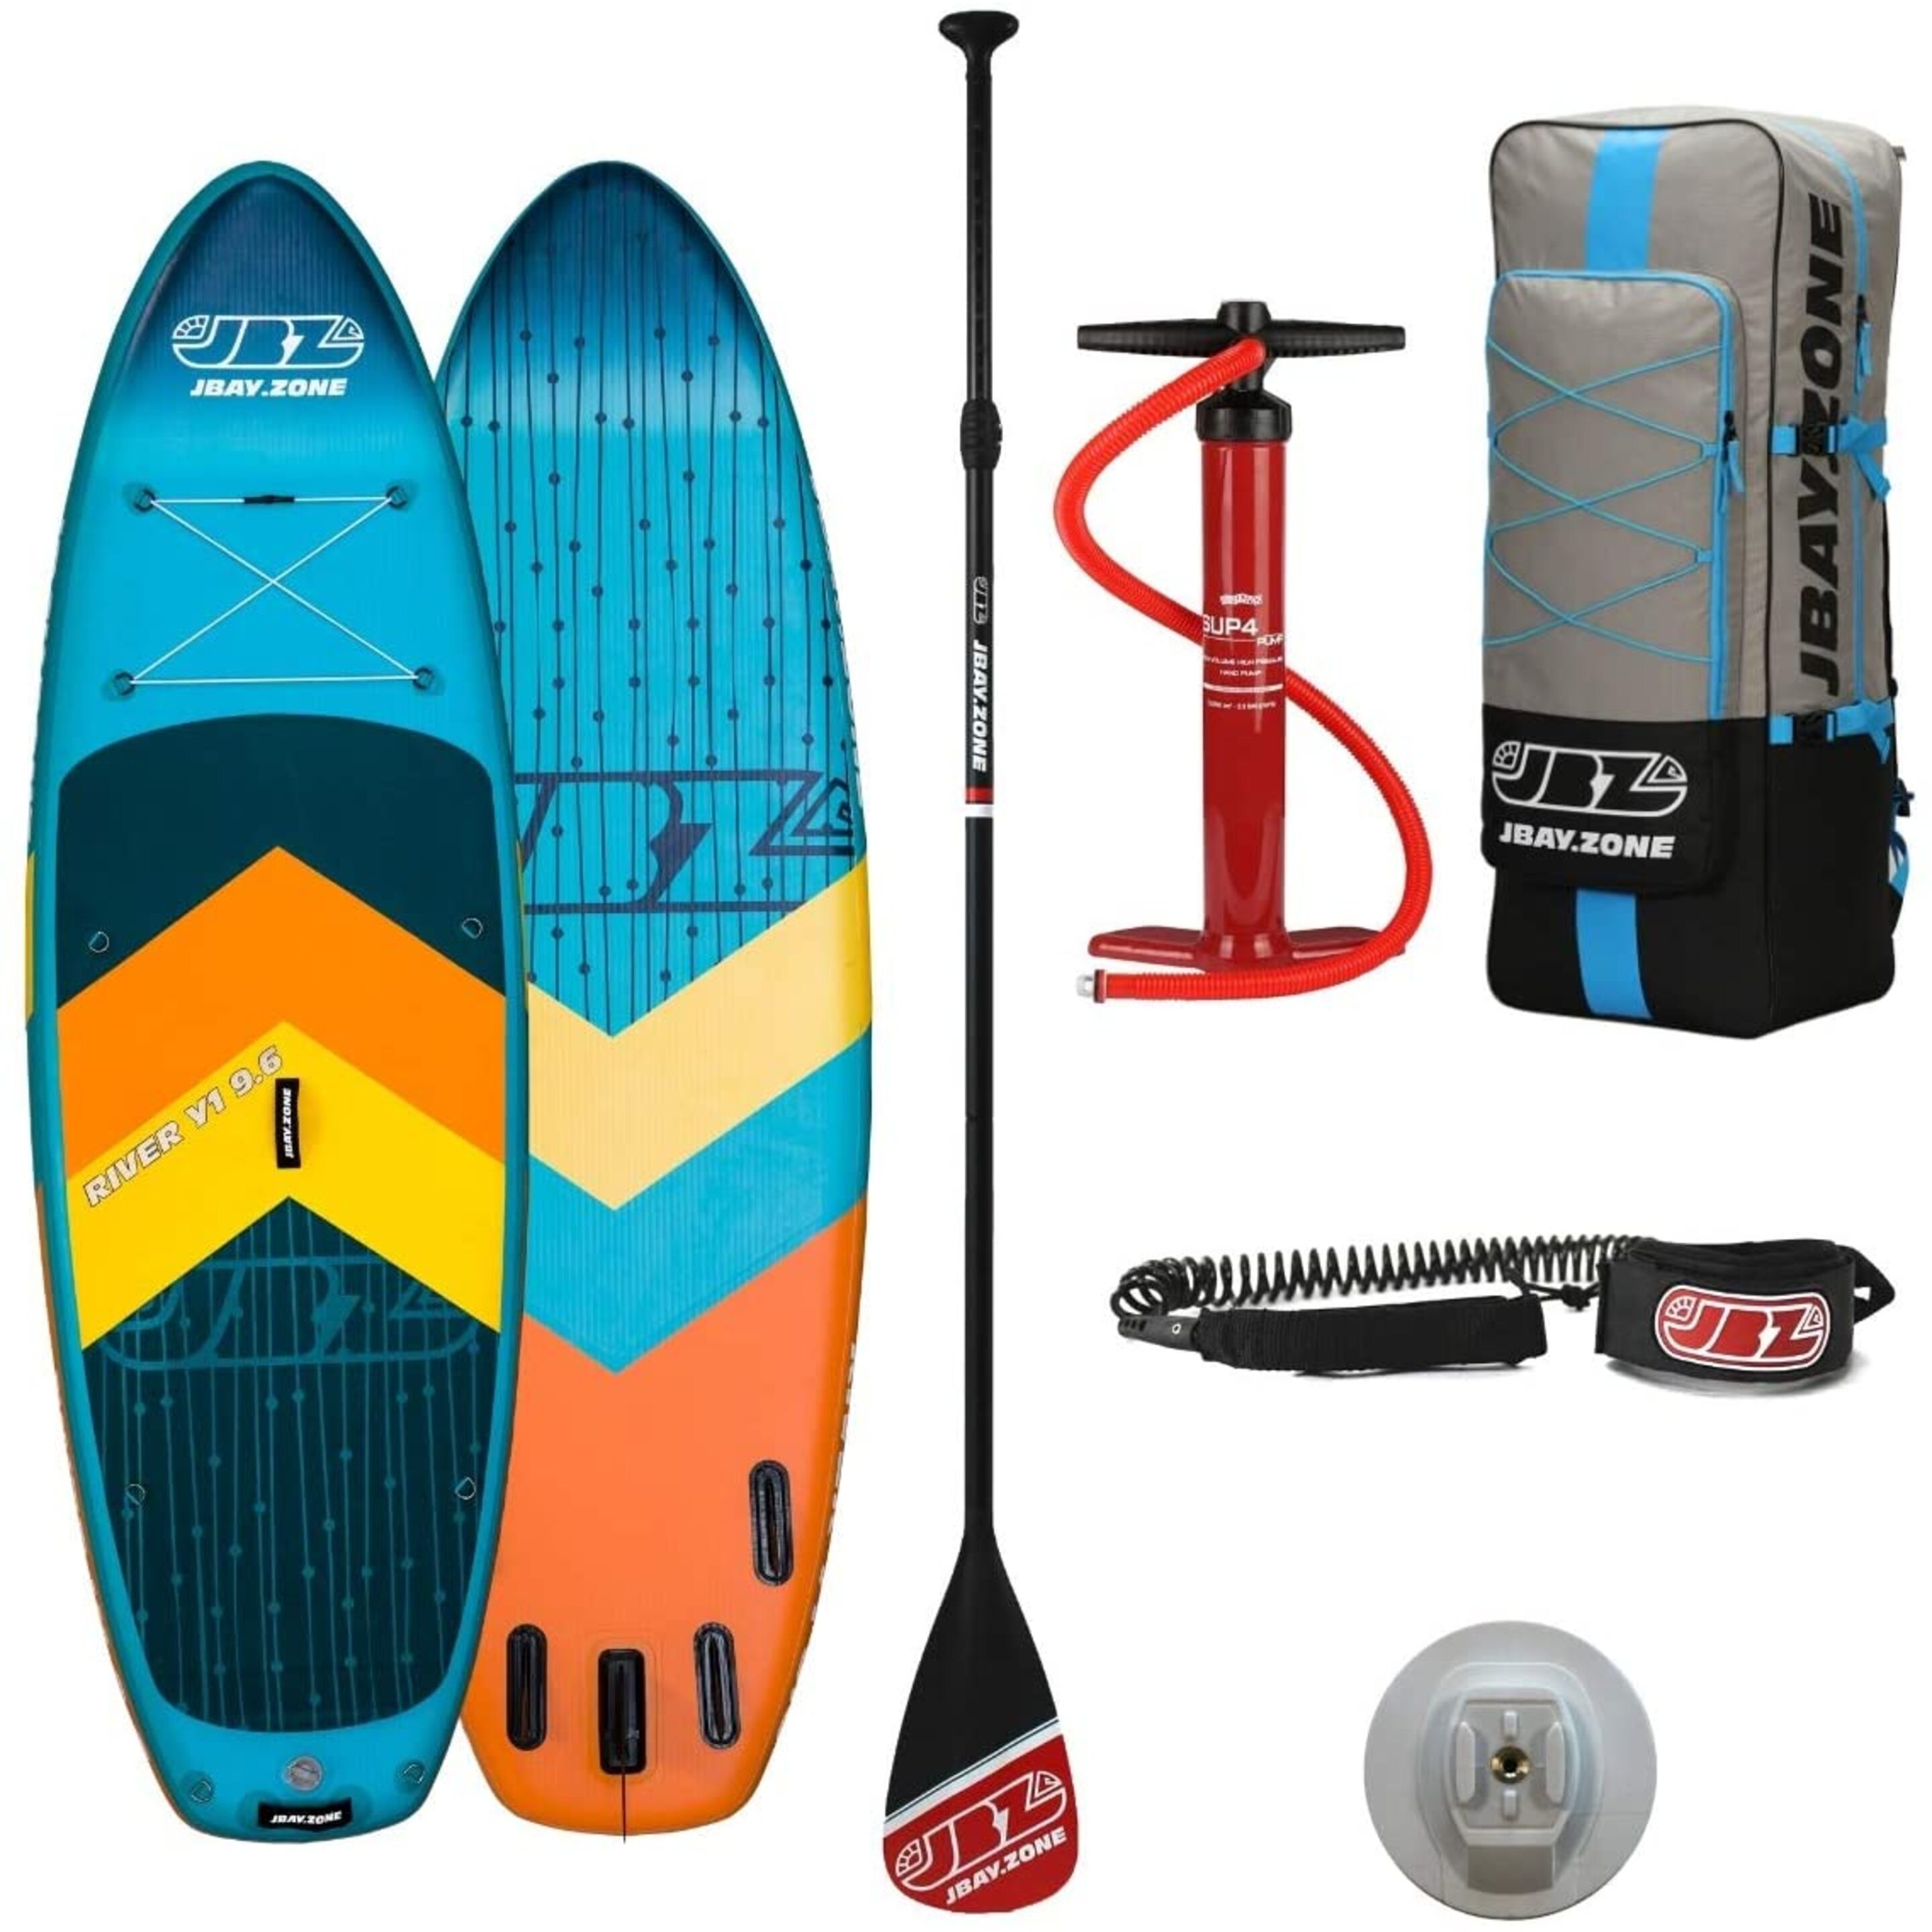 Tabla De Stand Up Paddle Surf Hinchable Jbay.zone Sup River Y1  Whitewater Sup